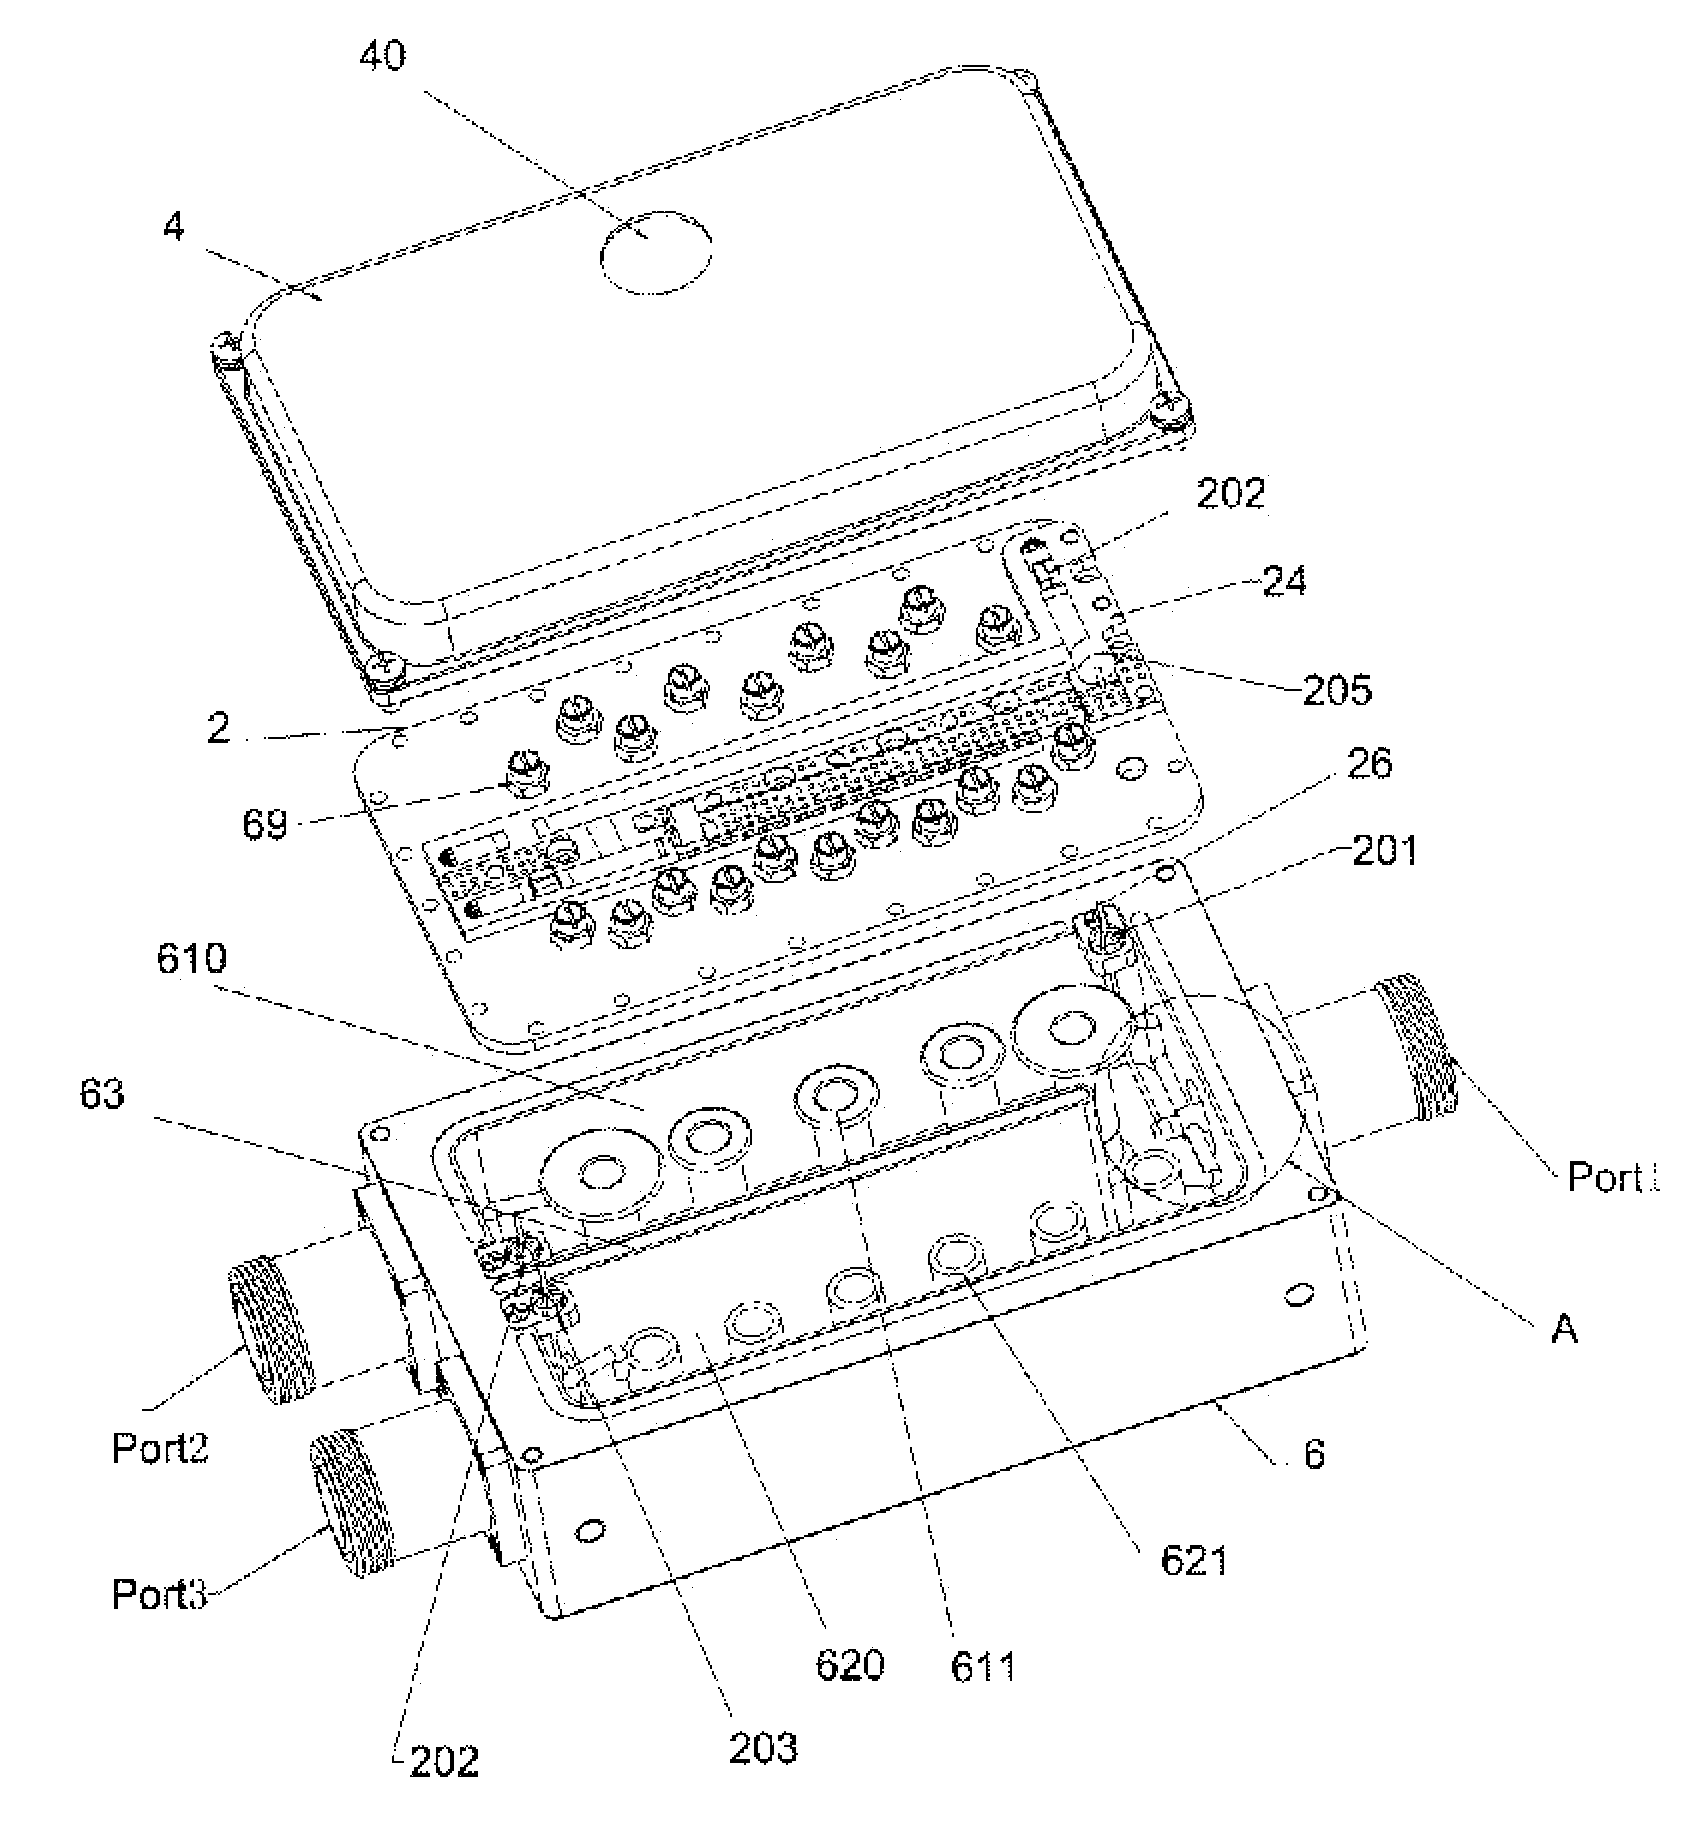 Ultra wide-band dual-frequency combiner